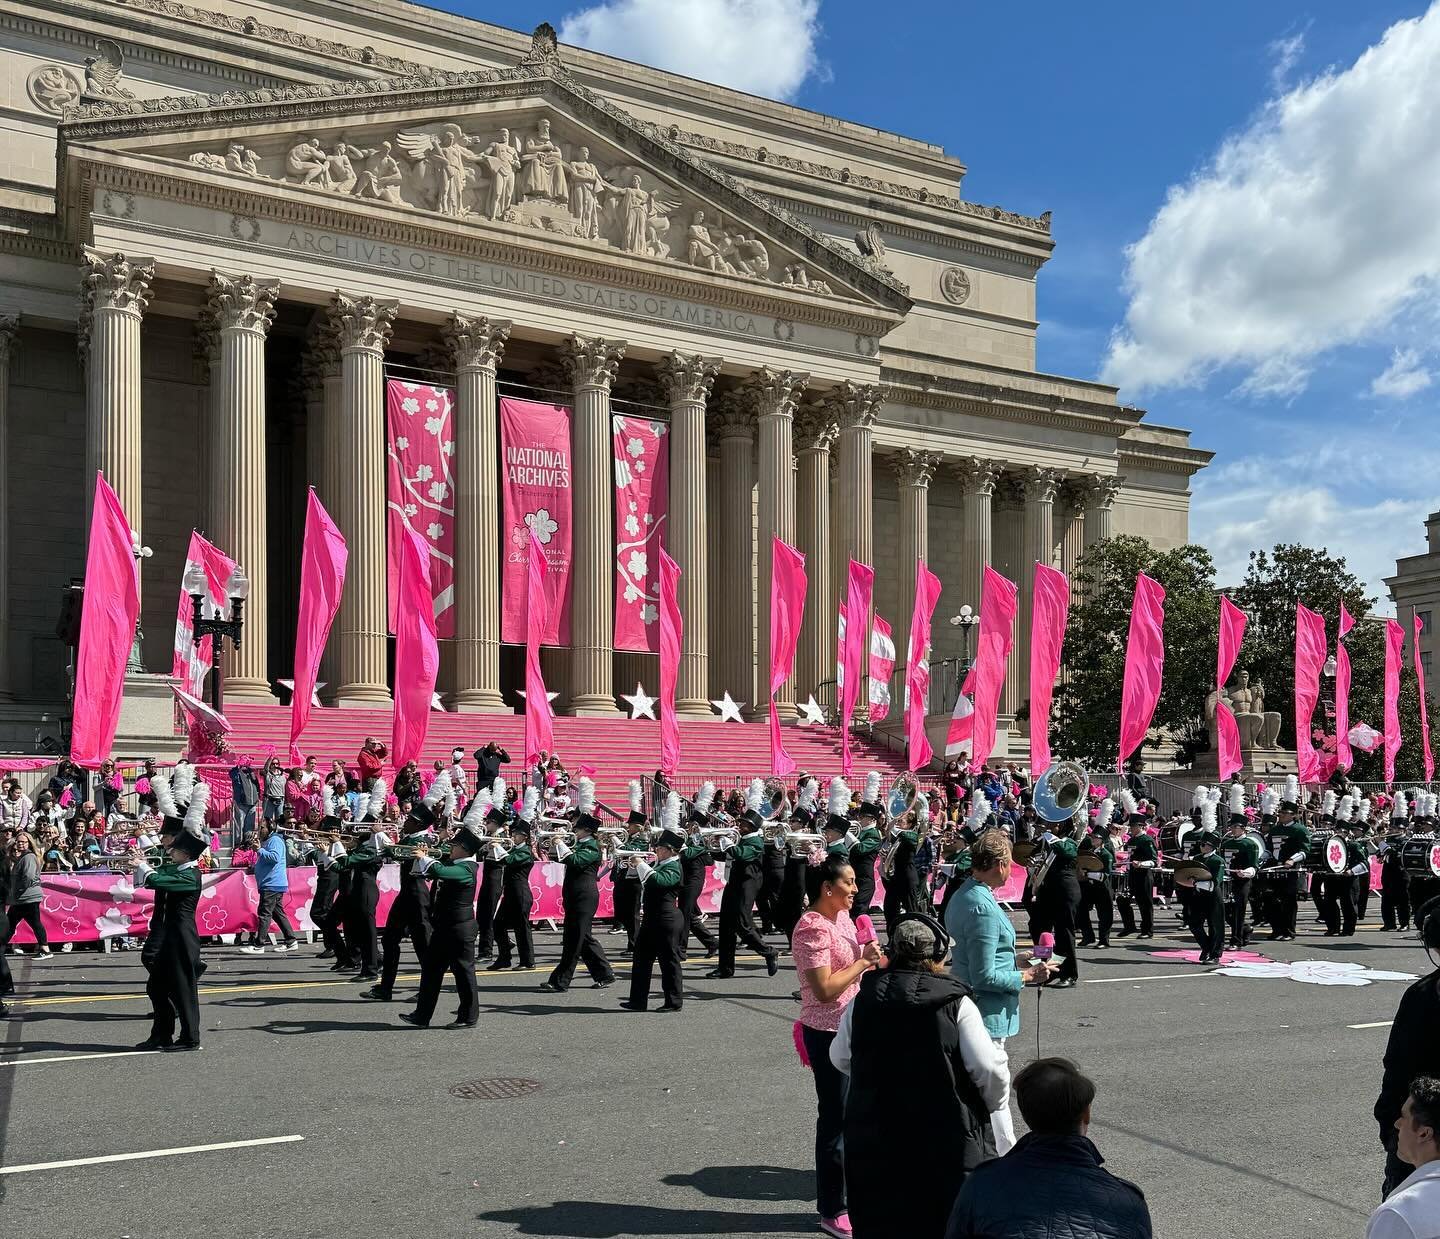 Team LINK is honored and excited to be the communications and PR partner for @cherryblossfest 🌸. The event of the spring, the Festival parade happened today, marking the end of a month of exciting and culturally enriching events. 

This Festival has